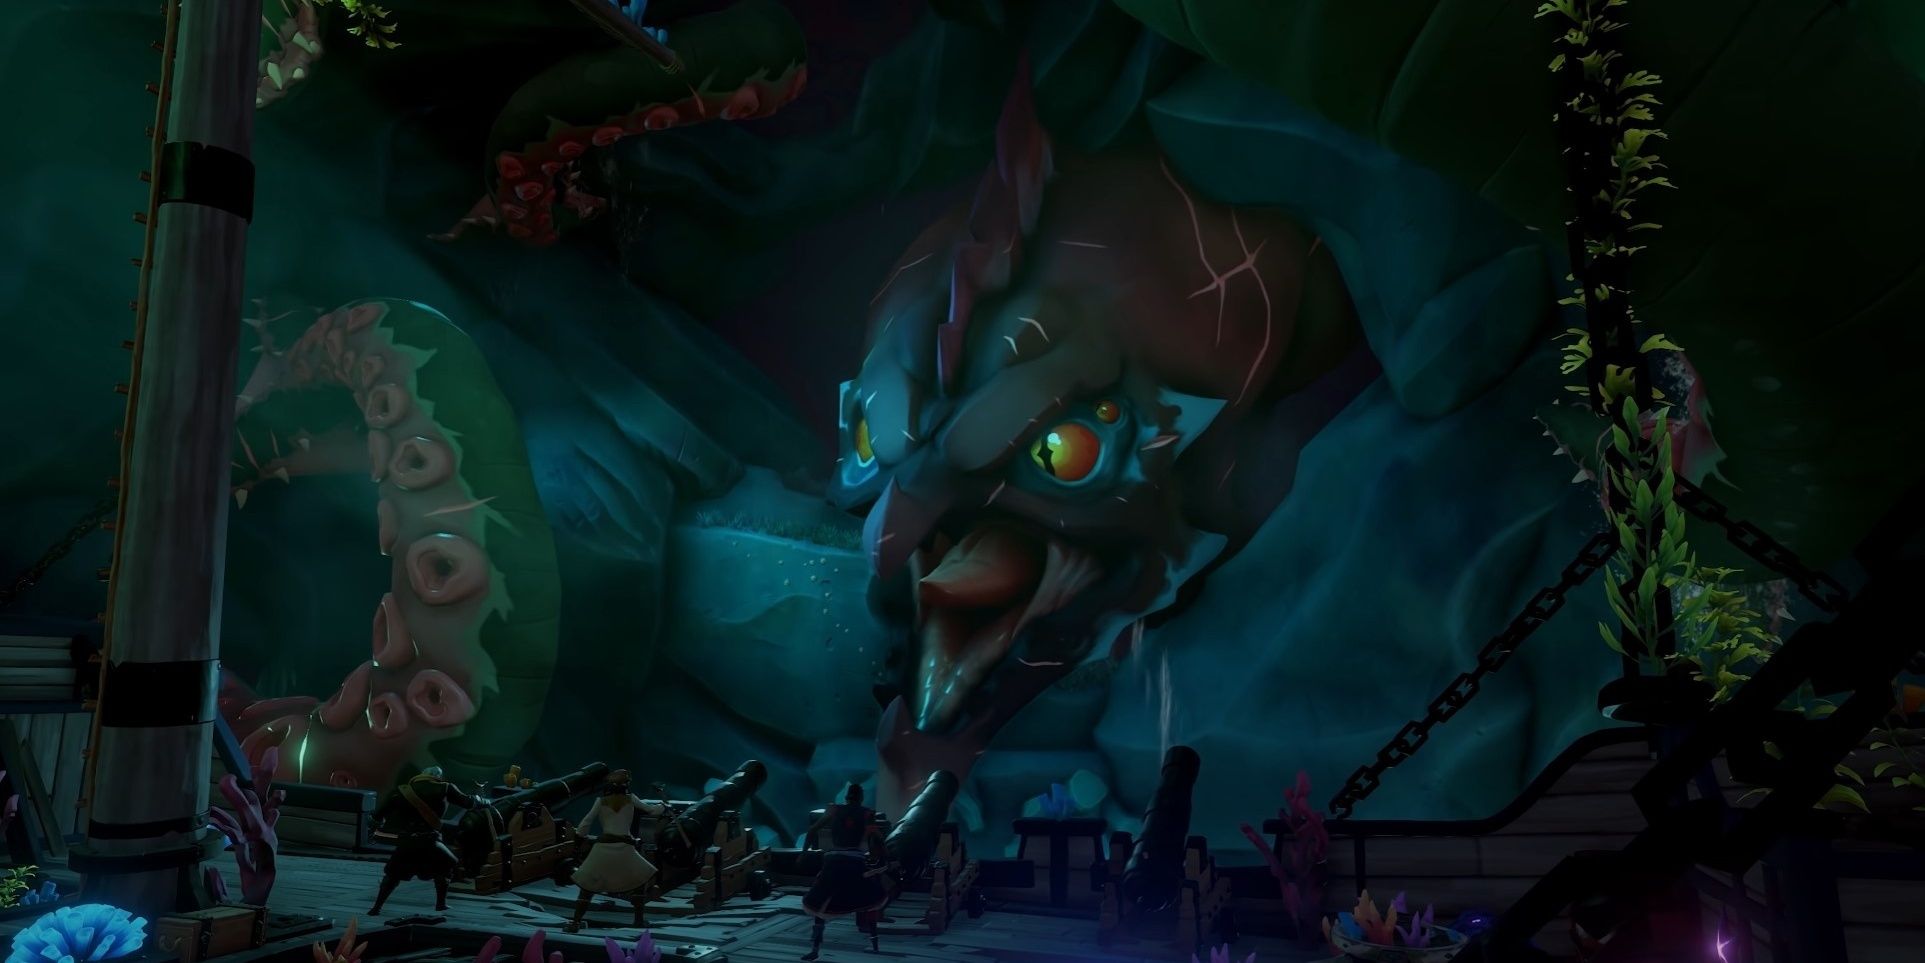 The Kraken in Sea of Thieves: A Pirate's Life